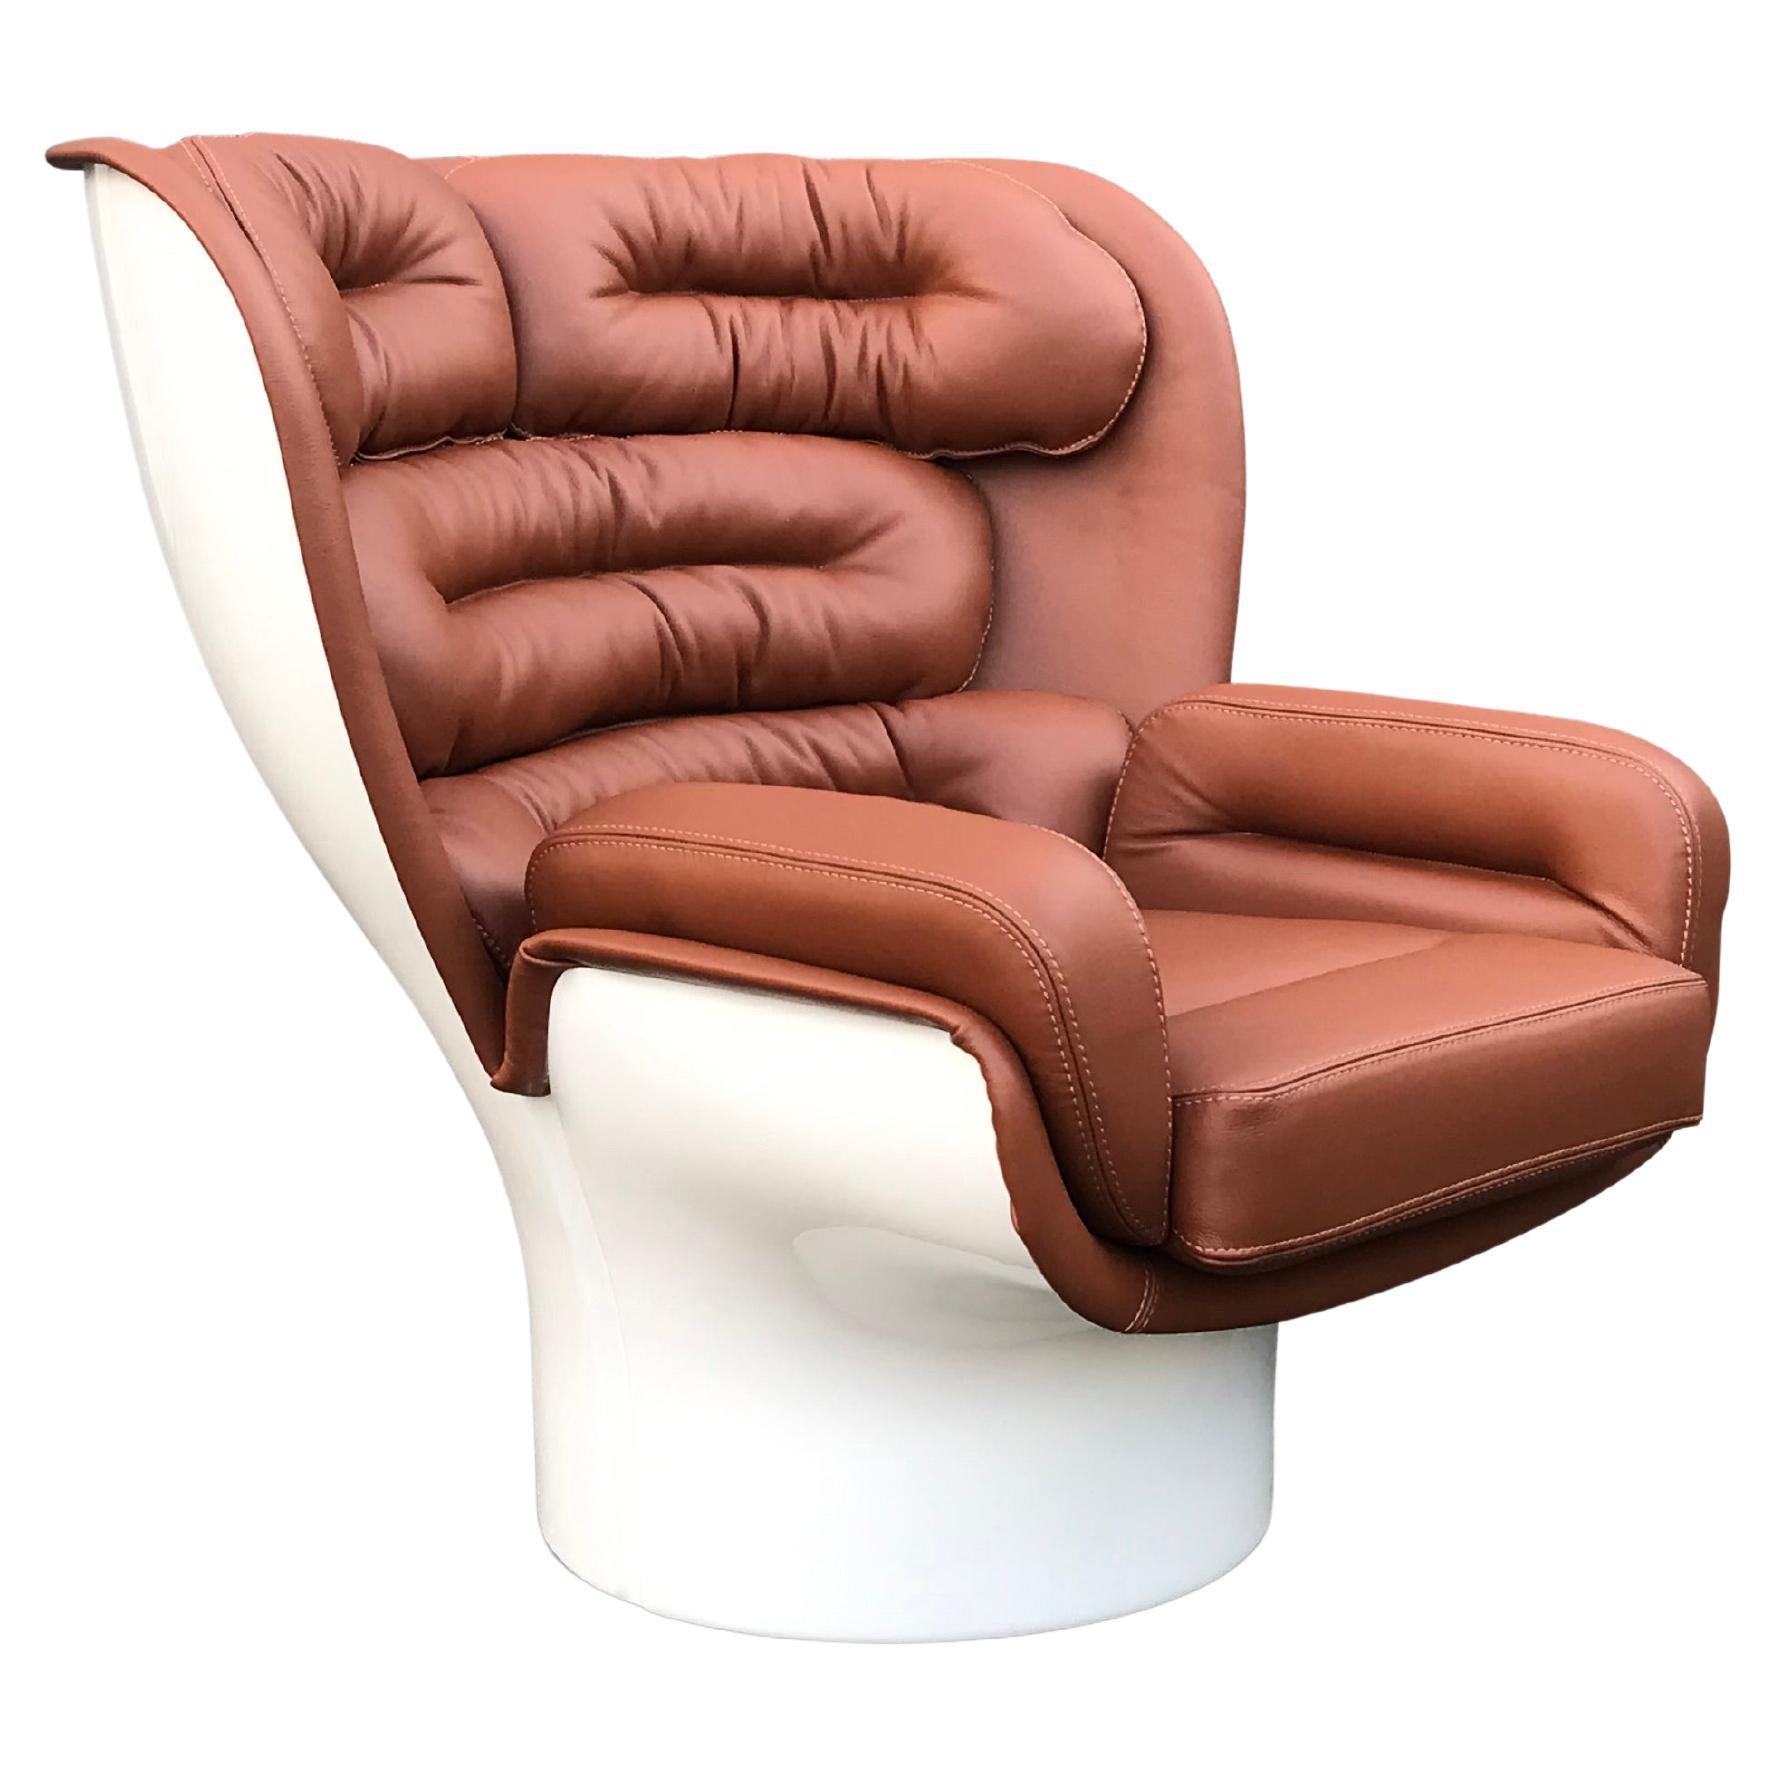 Cognac leather and white Elda chair by Joe Colombo for Longhi Italy For Sale